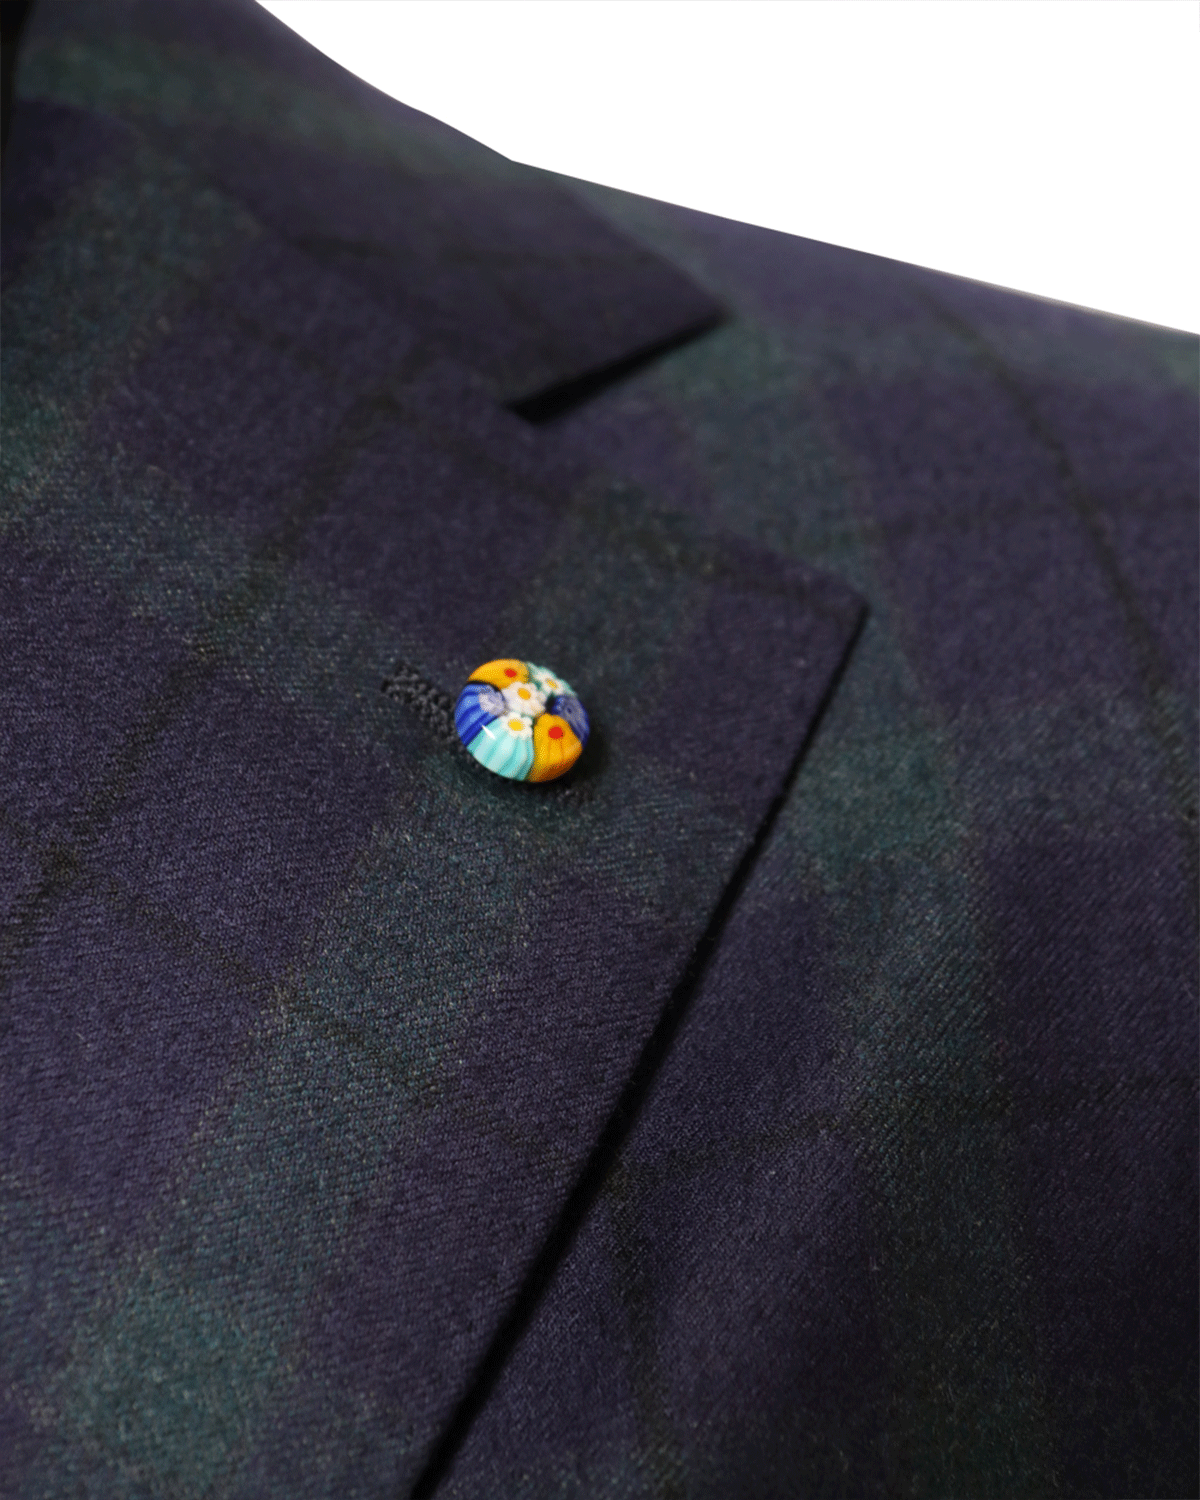 Navy and Green Plaid Soft Wool Sportcoat